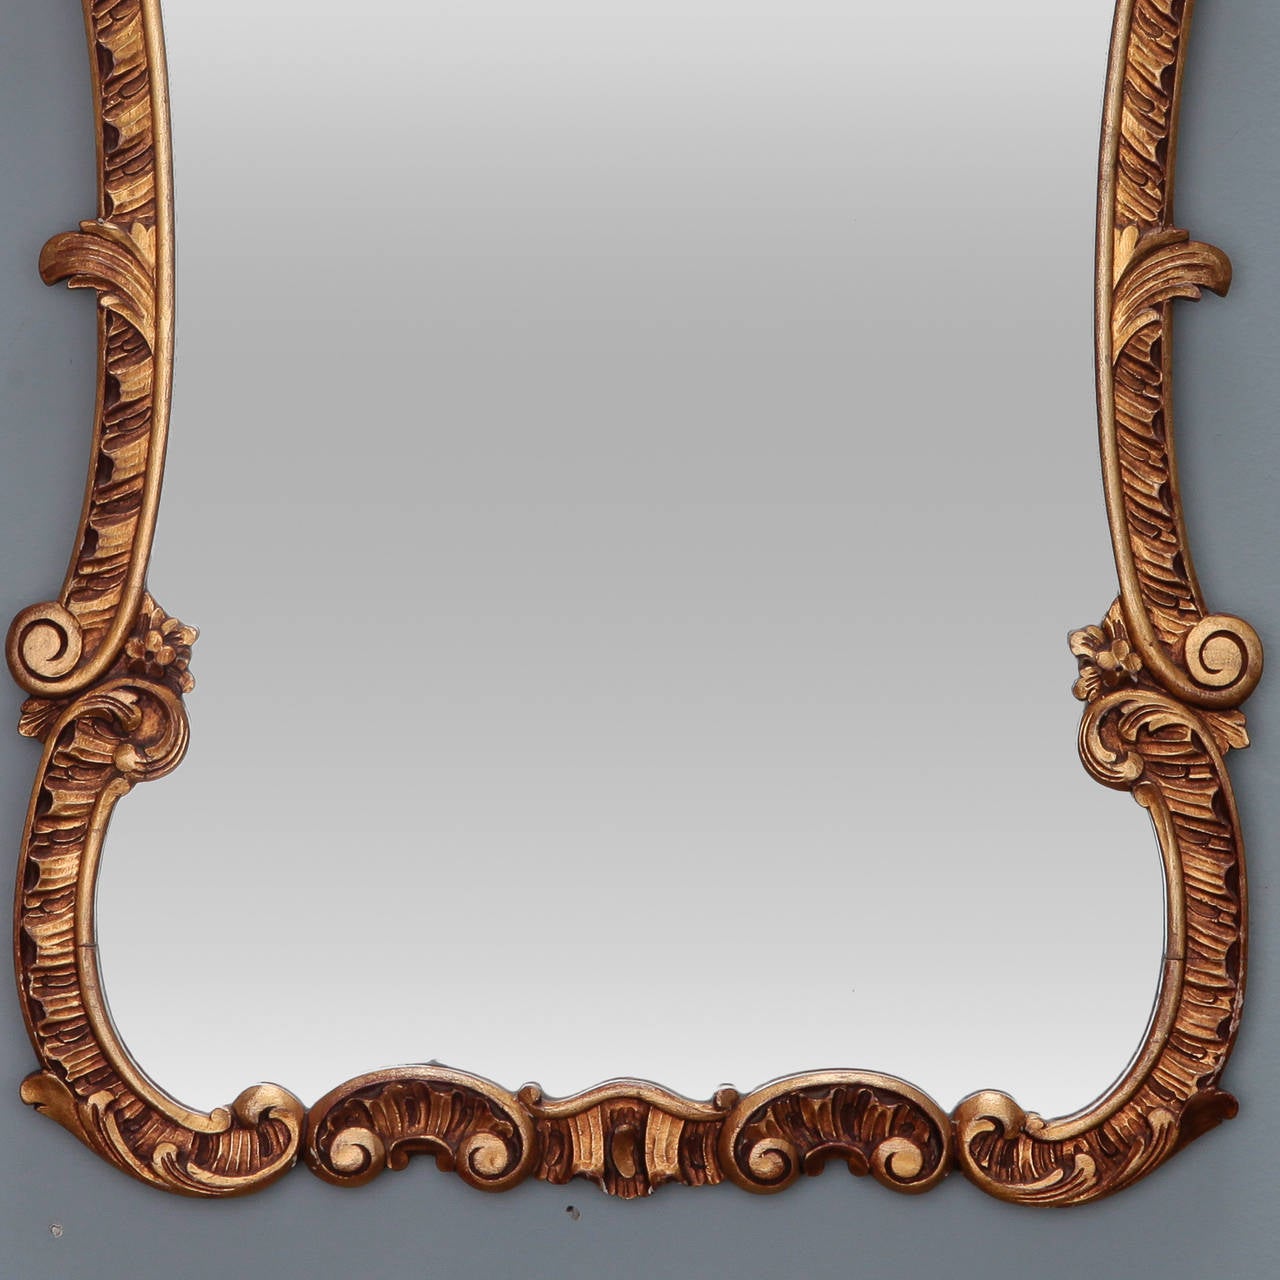 Mid-20th Century Italian Giltwood Mirror with Open Work Crest